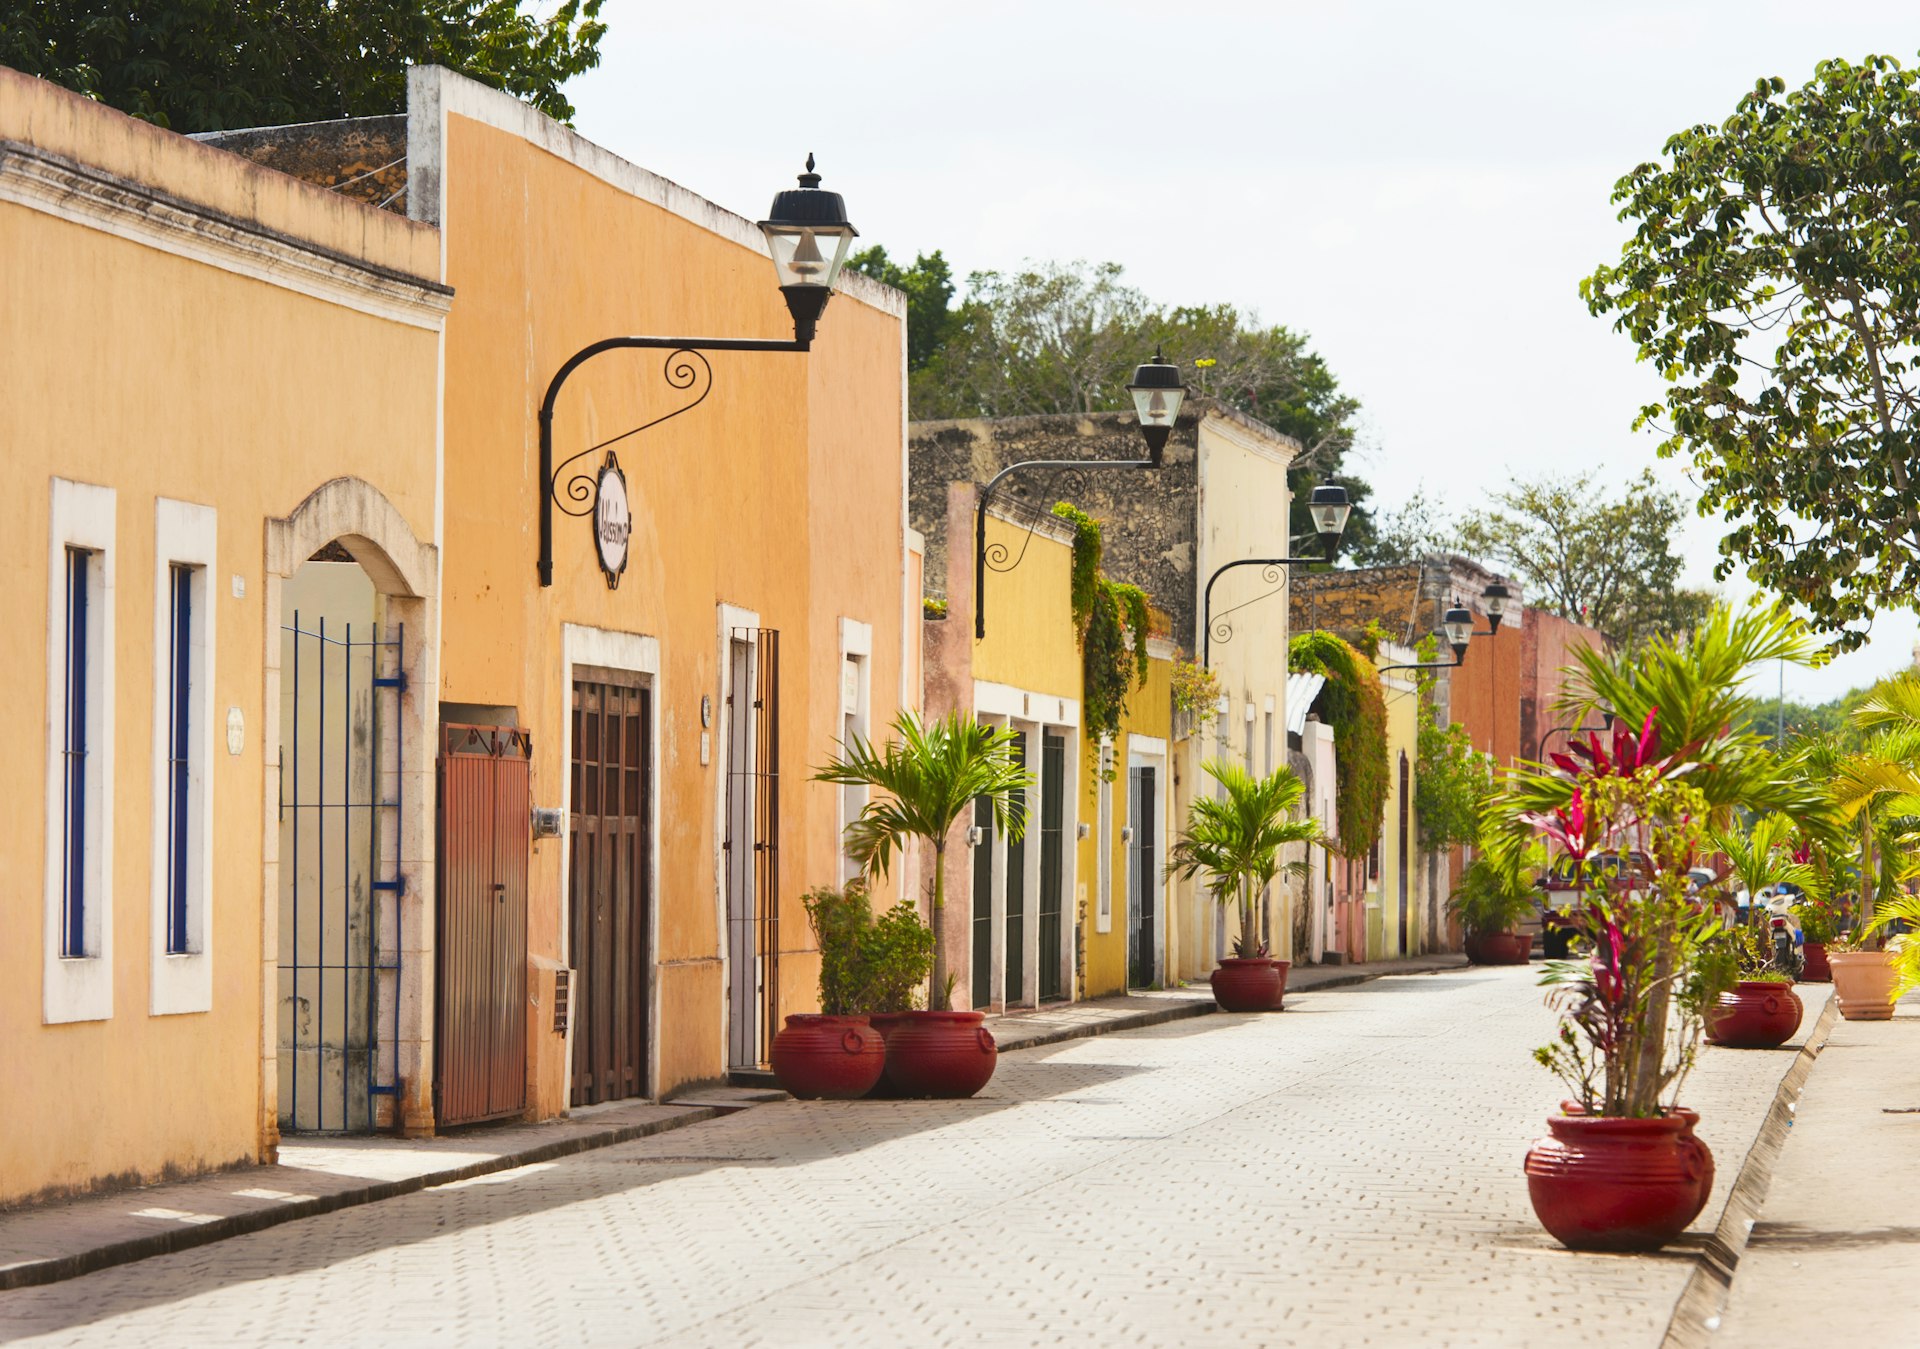 Colorful street in Valladolid, Mexico